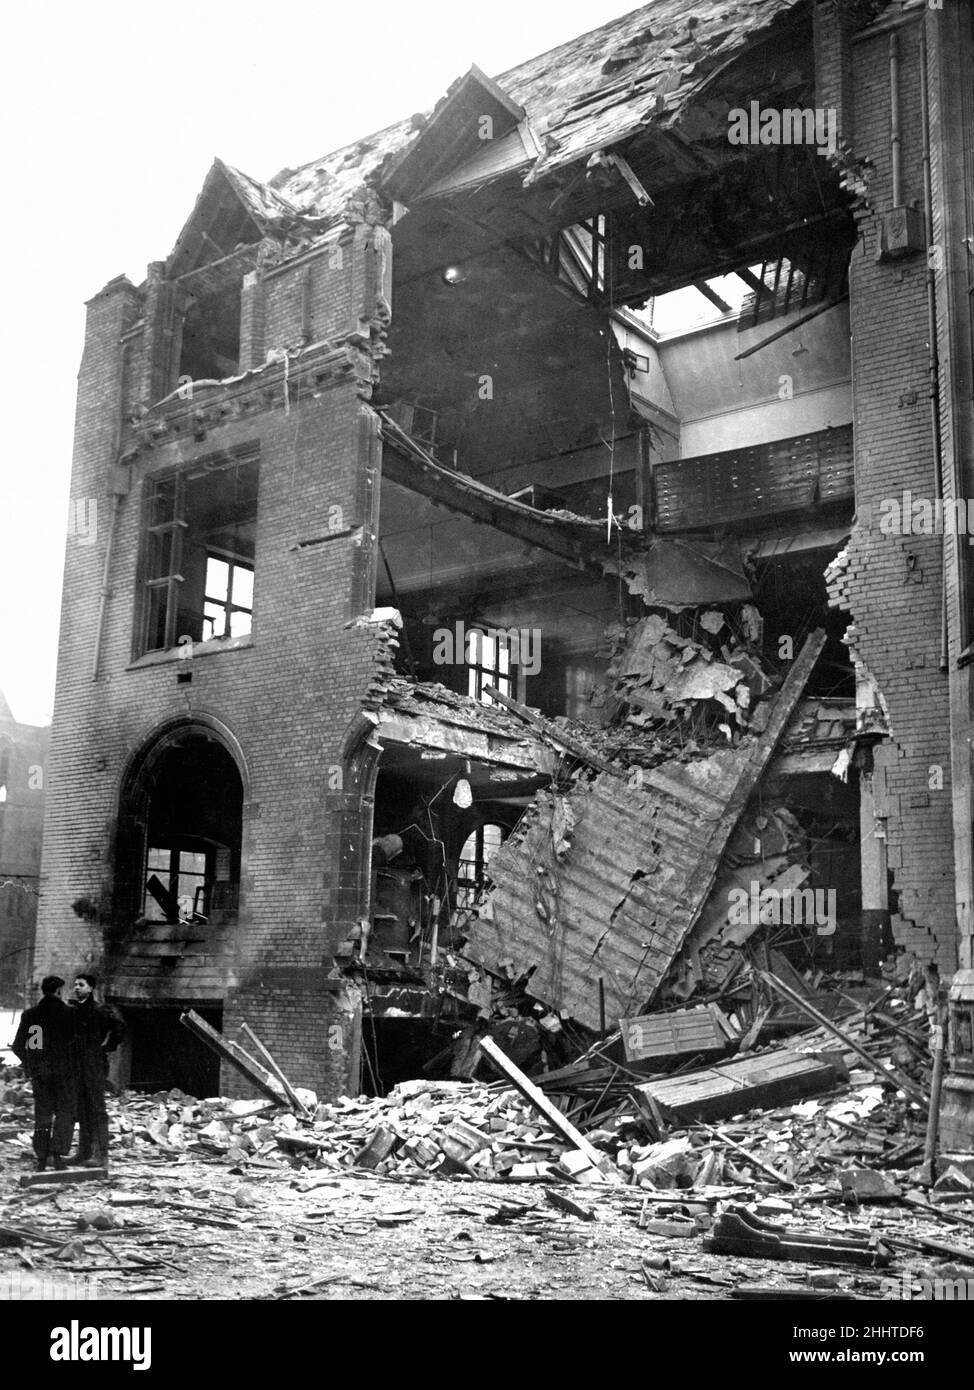 Engineering Laboratory of Liverpool University, severely damaged by a bomb during last nights raids, pictured, Wednesday 13th March 1941. The only people on duty were members of the Auxiliary Fire Service and no one was hurt, with the exception of a night watchman who was slightly cut by flying glass. Stock Photo